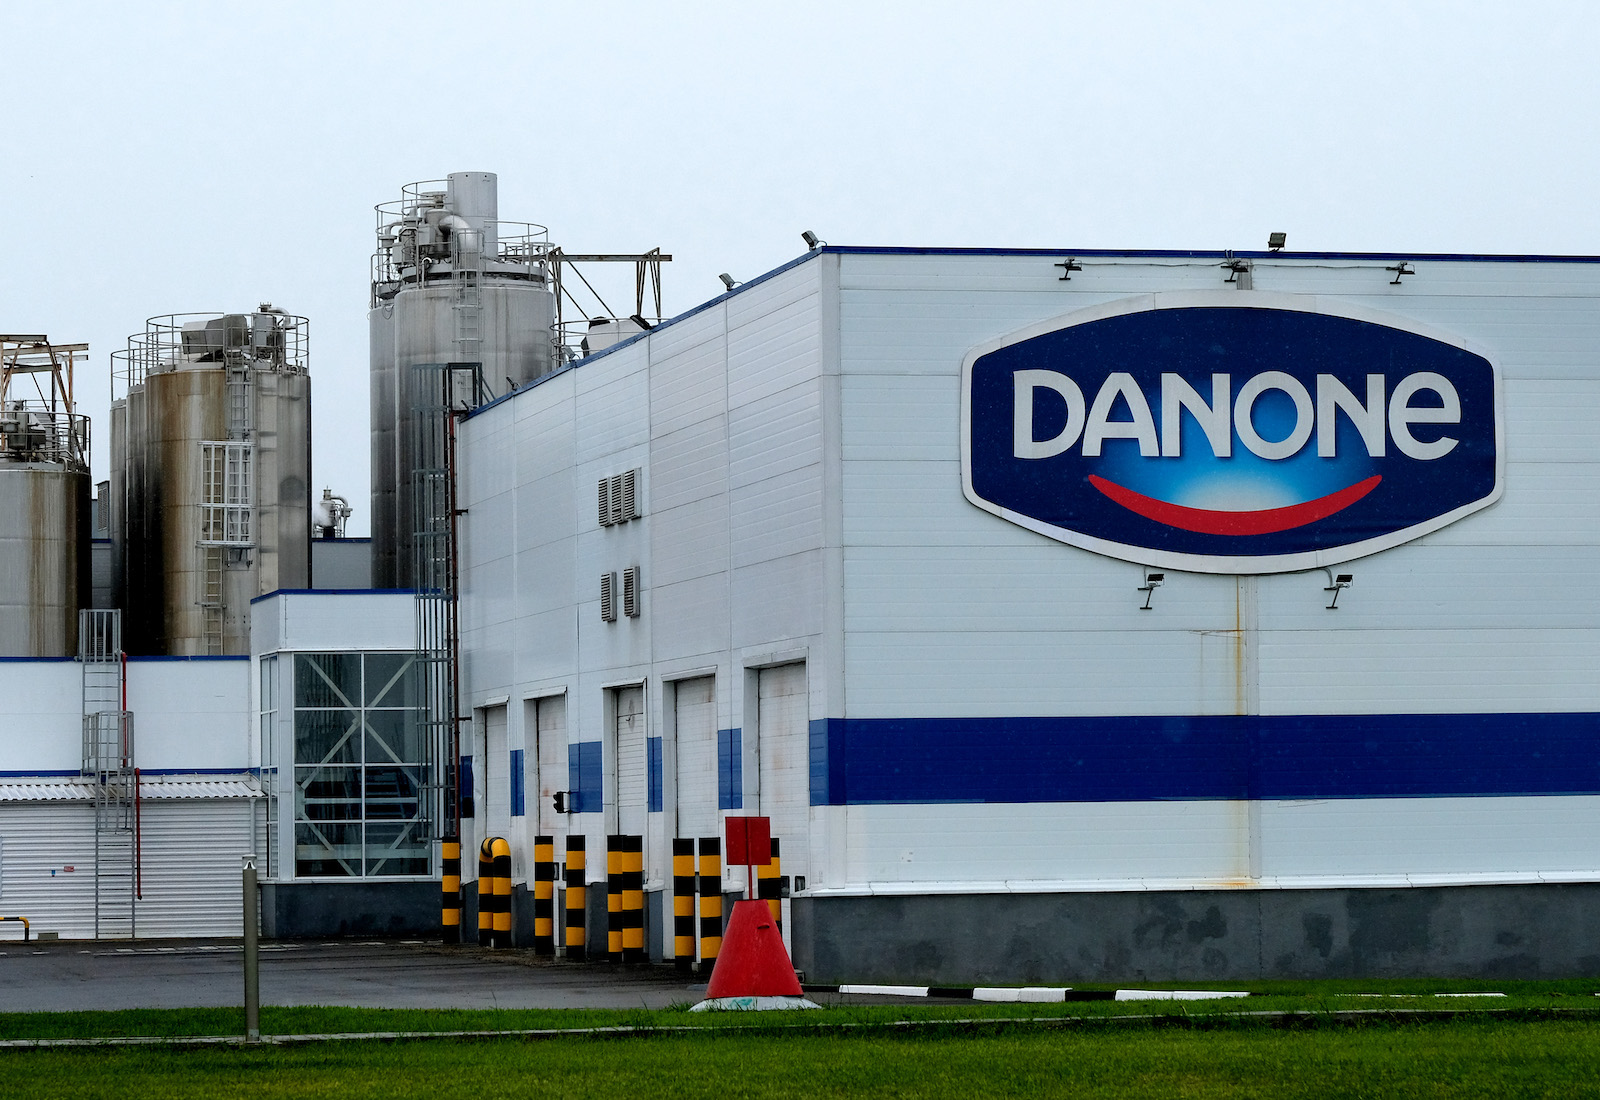 A factory with a large Danone logo